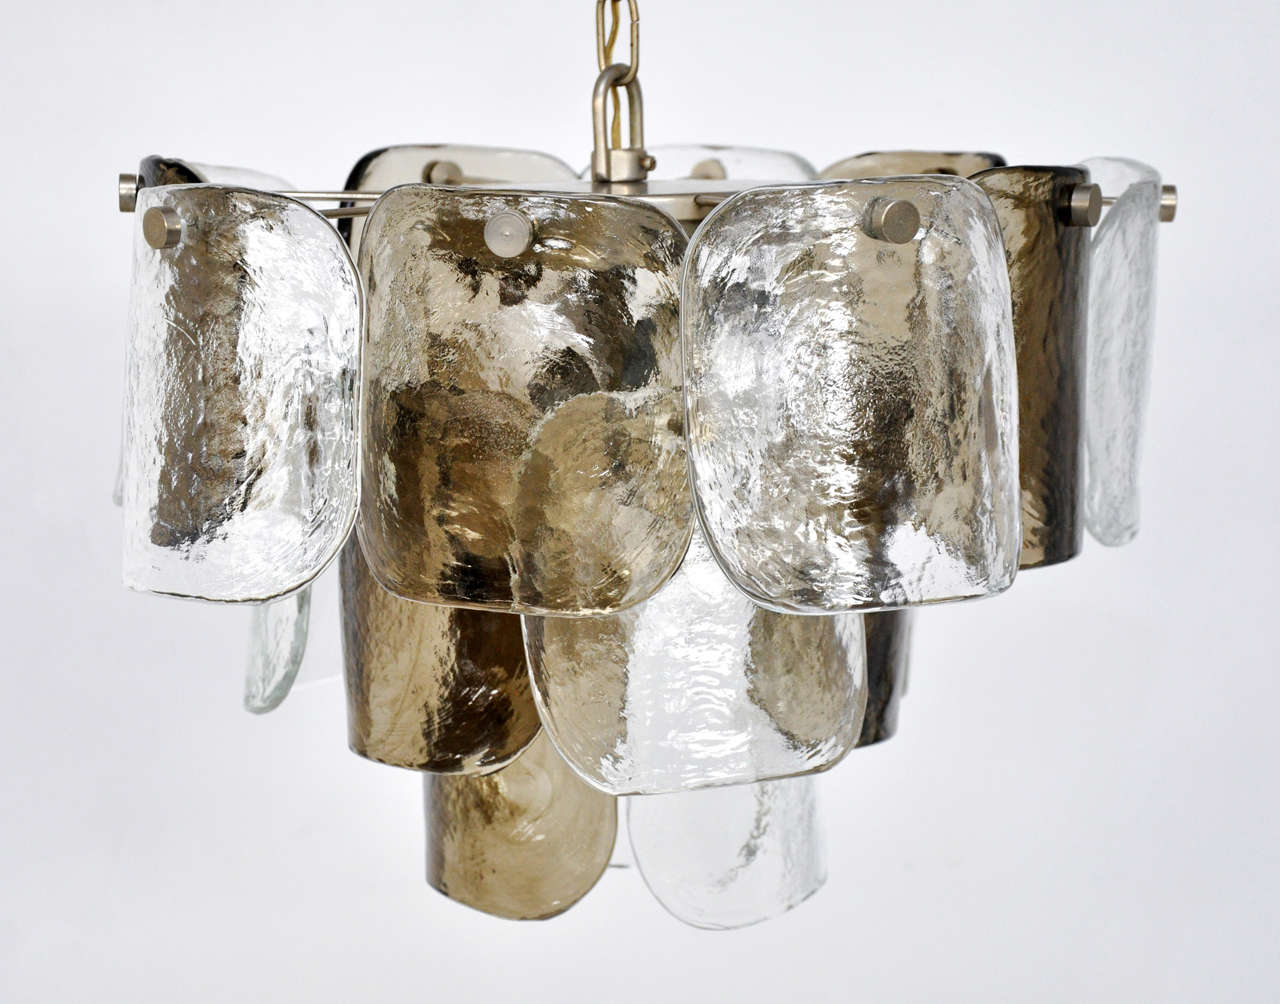 Murano glass petal chandelier by Carlo Nason for Mazzega.  Smoked and clear glass petals over nickel structure.  36